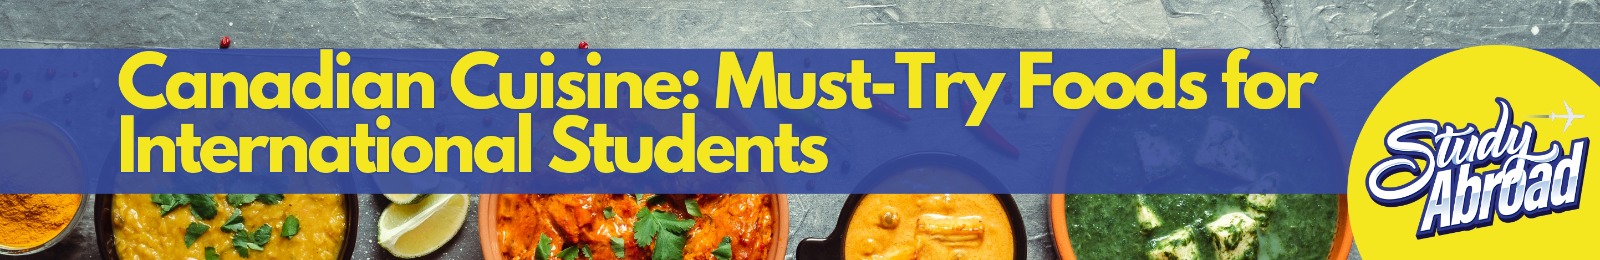 CANADIAN CUISINE: MUST-TRY FOODS FOR INTERNATIONAL STUDENTS